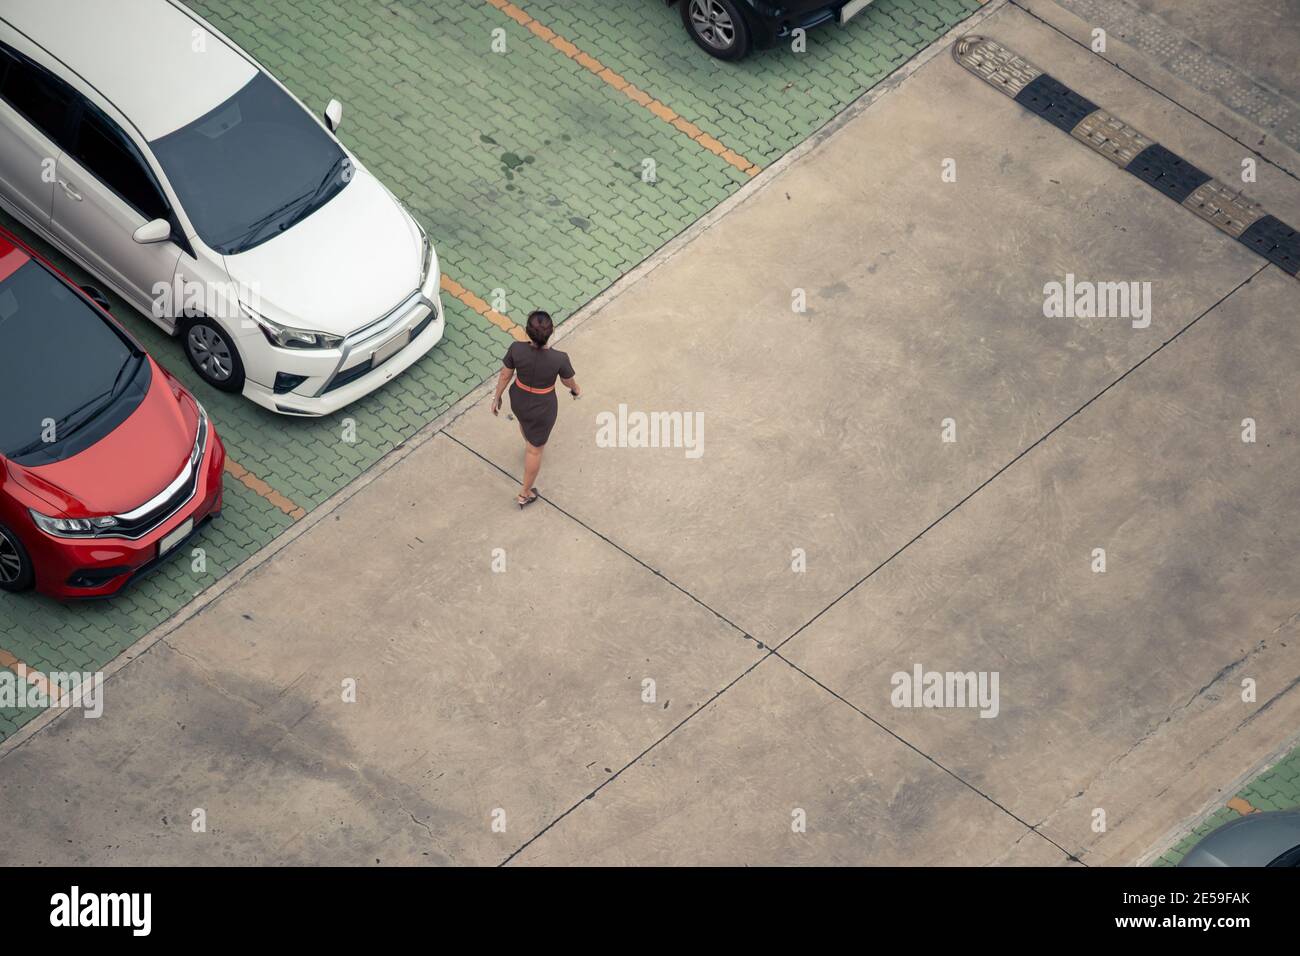 High angle view woman walking in parking lot Stock Photo